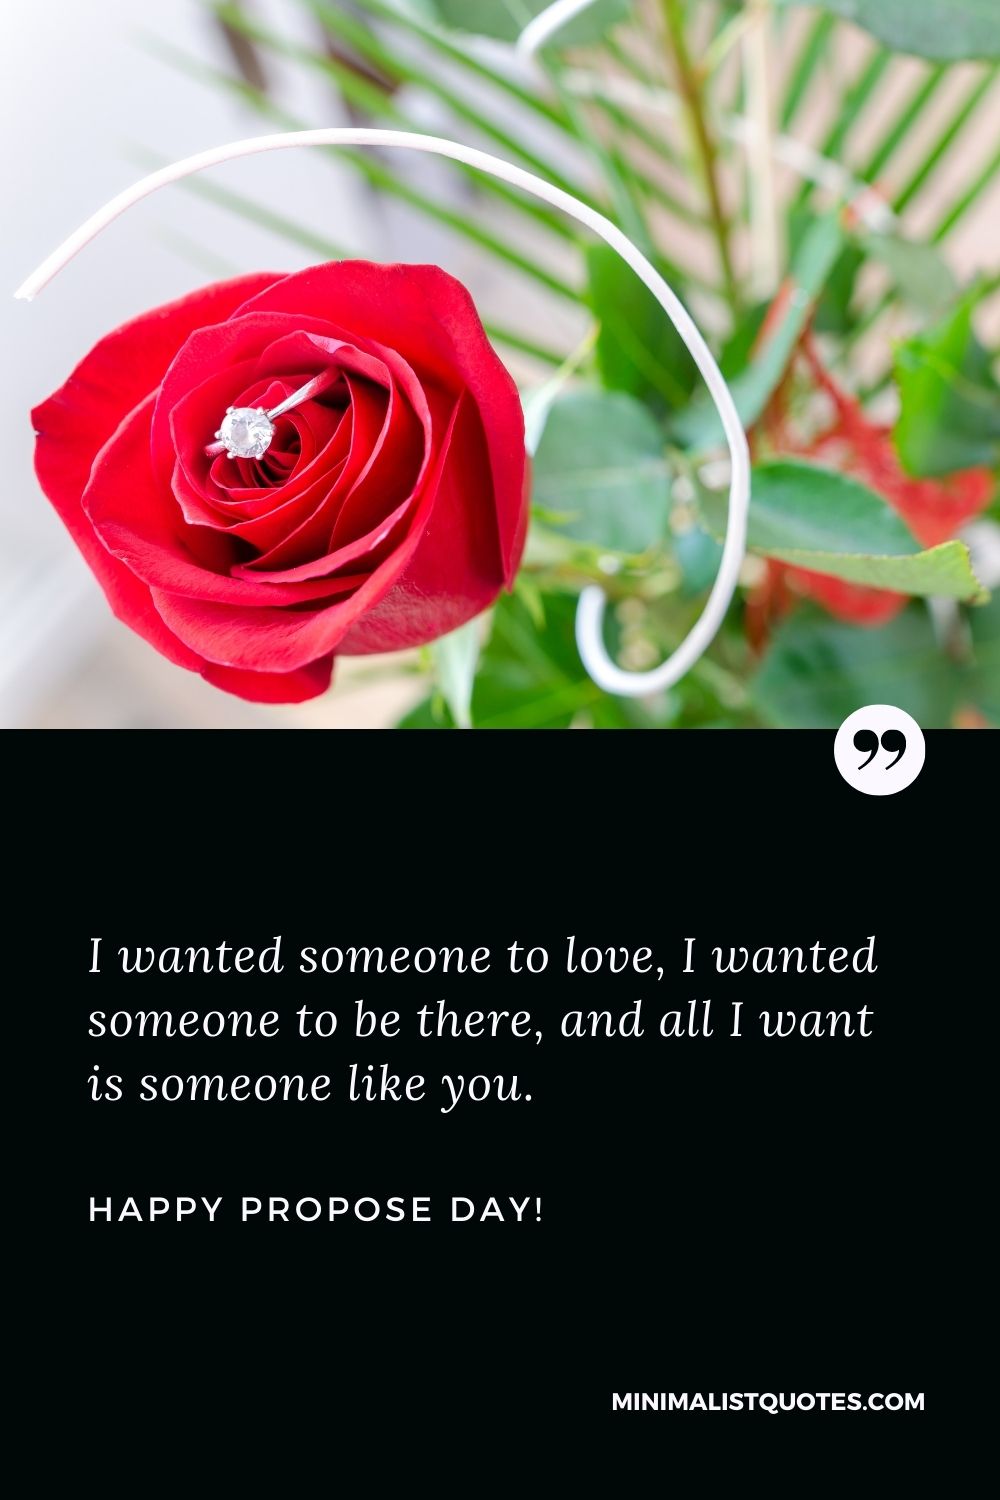 Happy Propose Day 2022: Wishes, Images, Quotes, Messages and WhatsApp  Greetings to Share on 2nd Day of Valentine's Week - News18